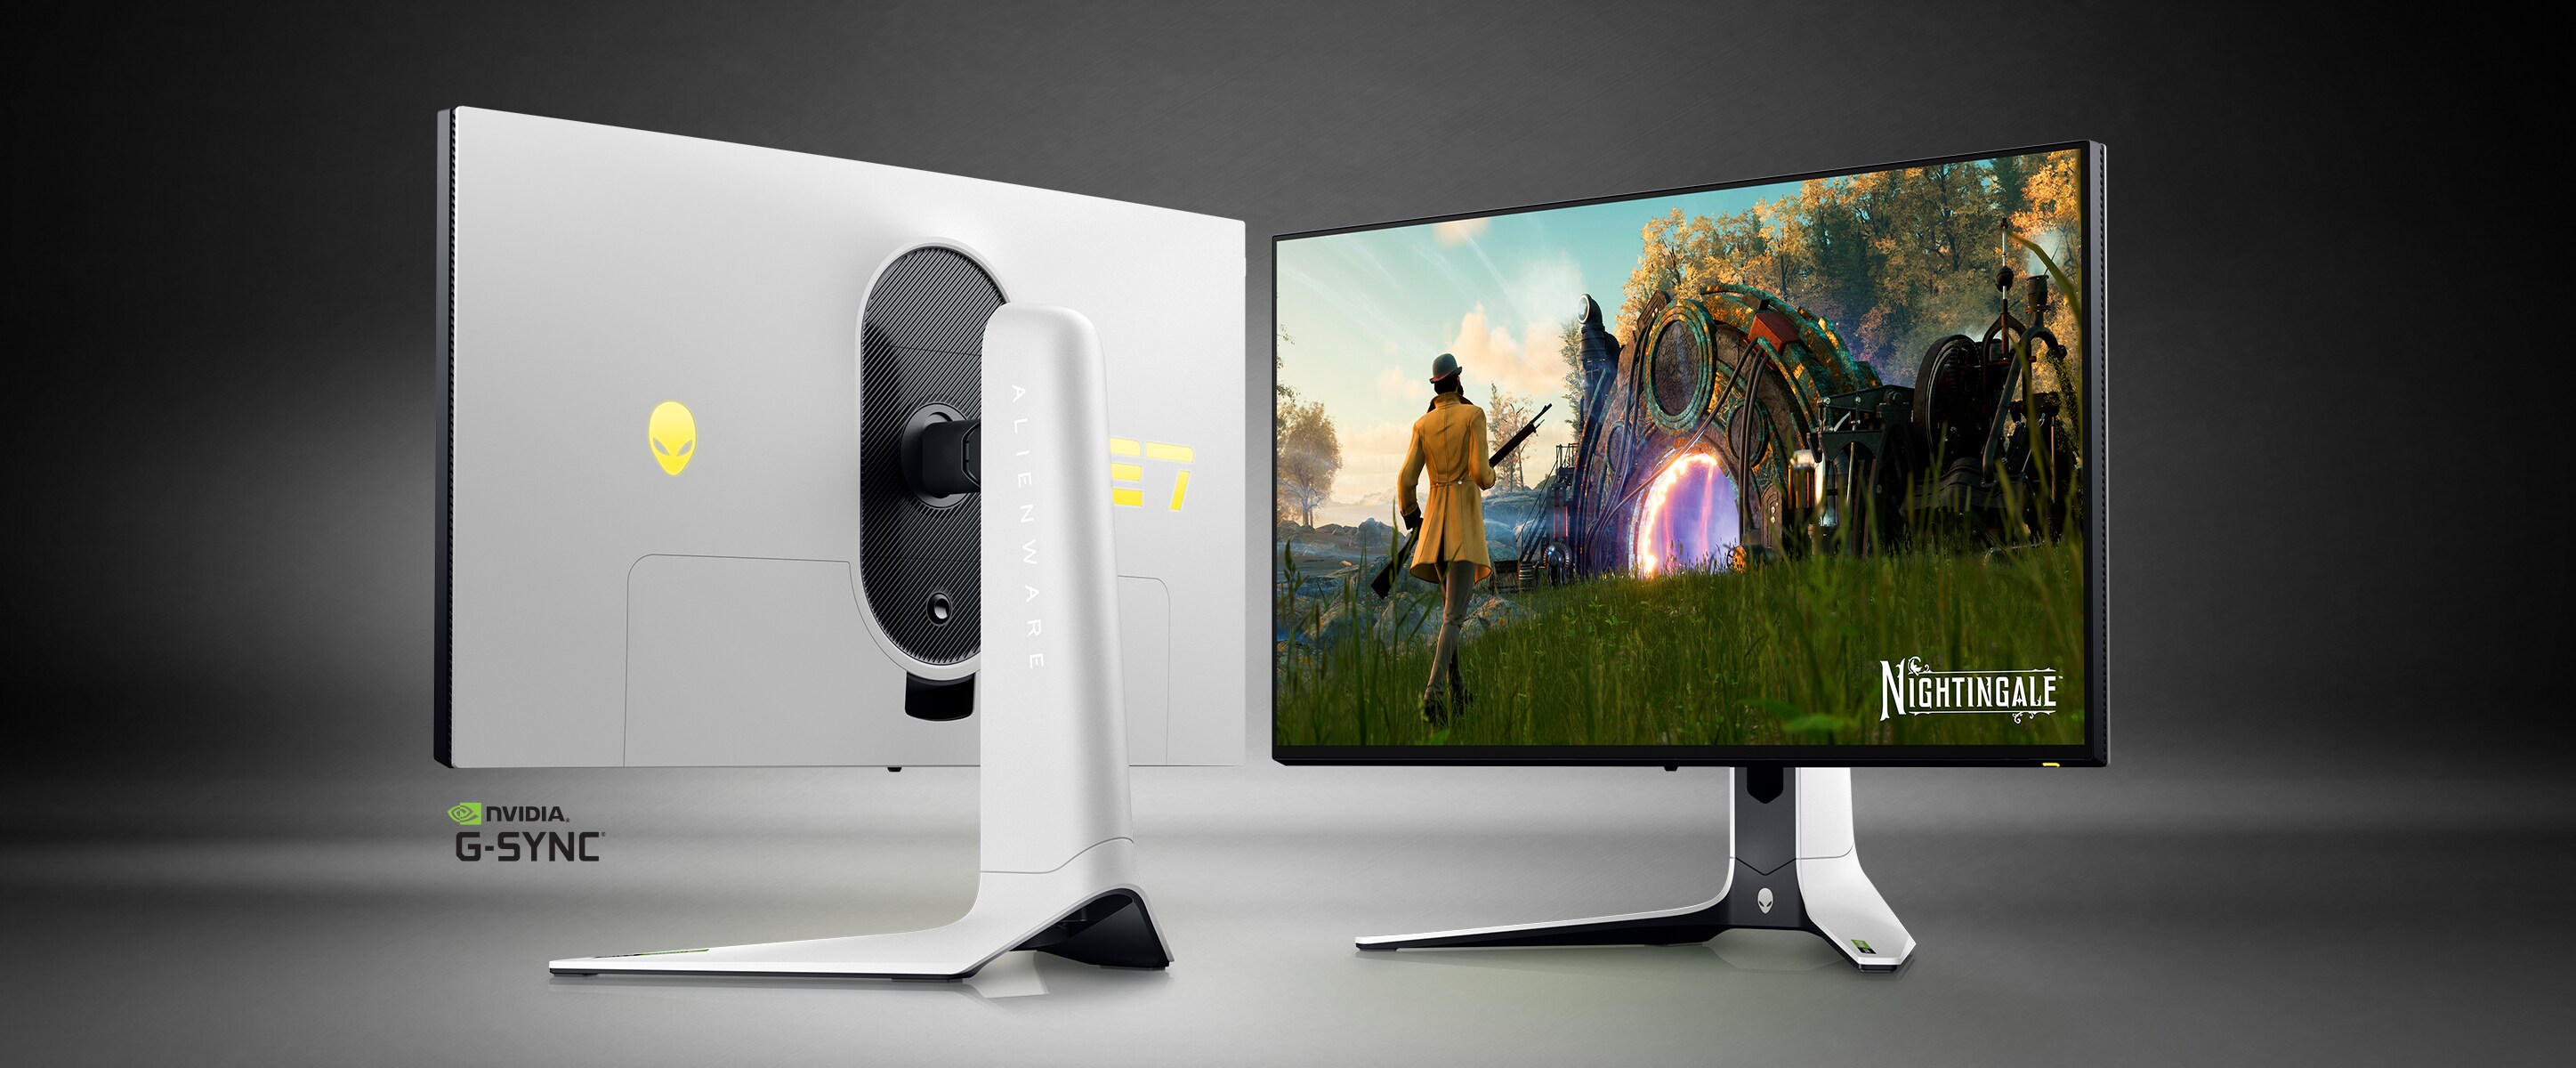 Picture of two Dell Alienware AW2723DF Gaming Monitors, one with a game image on the screen.